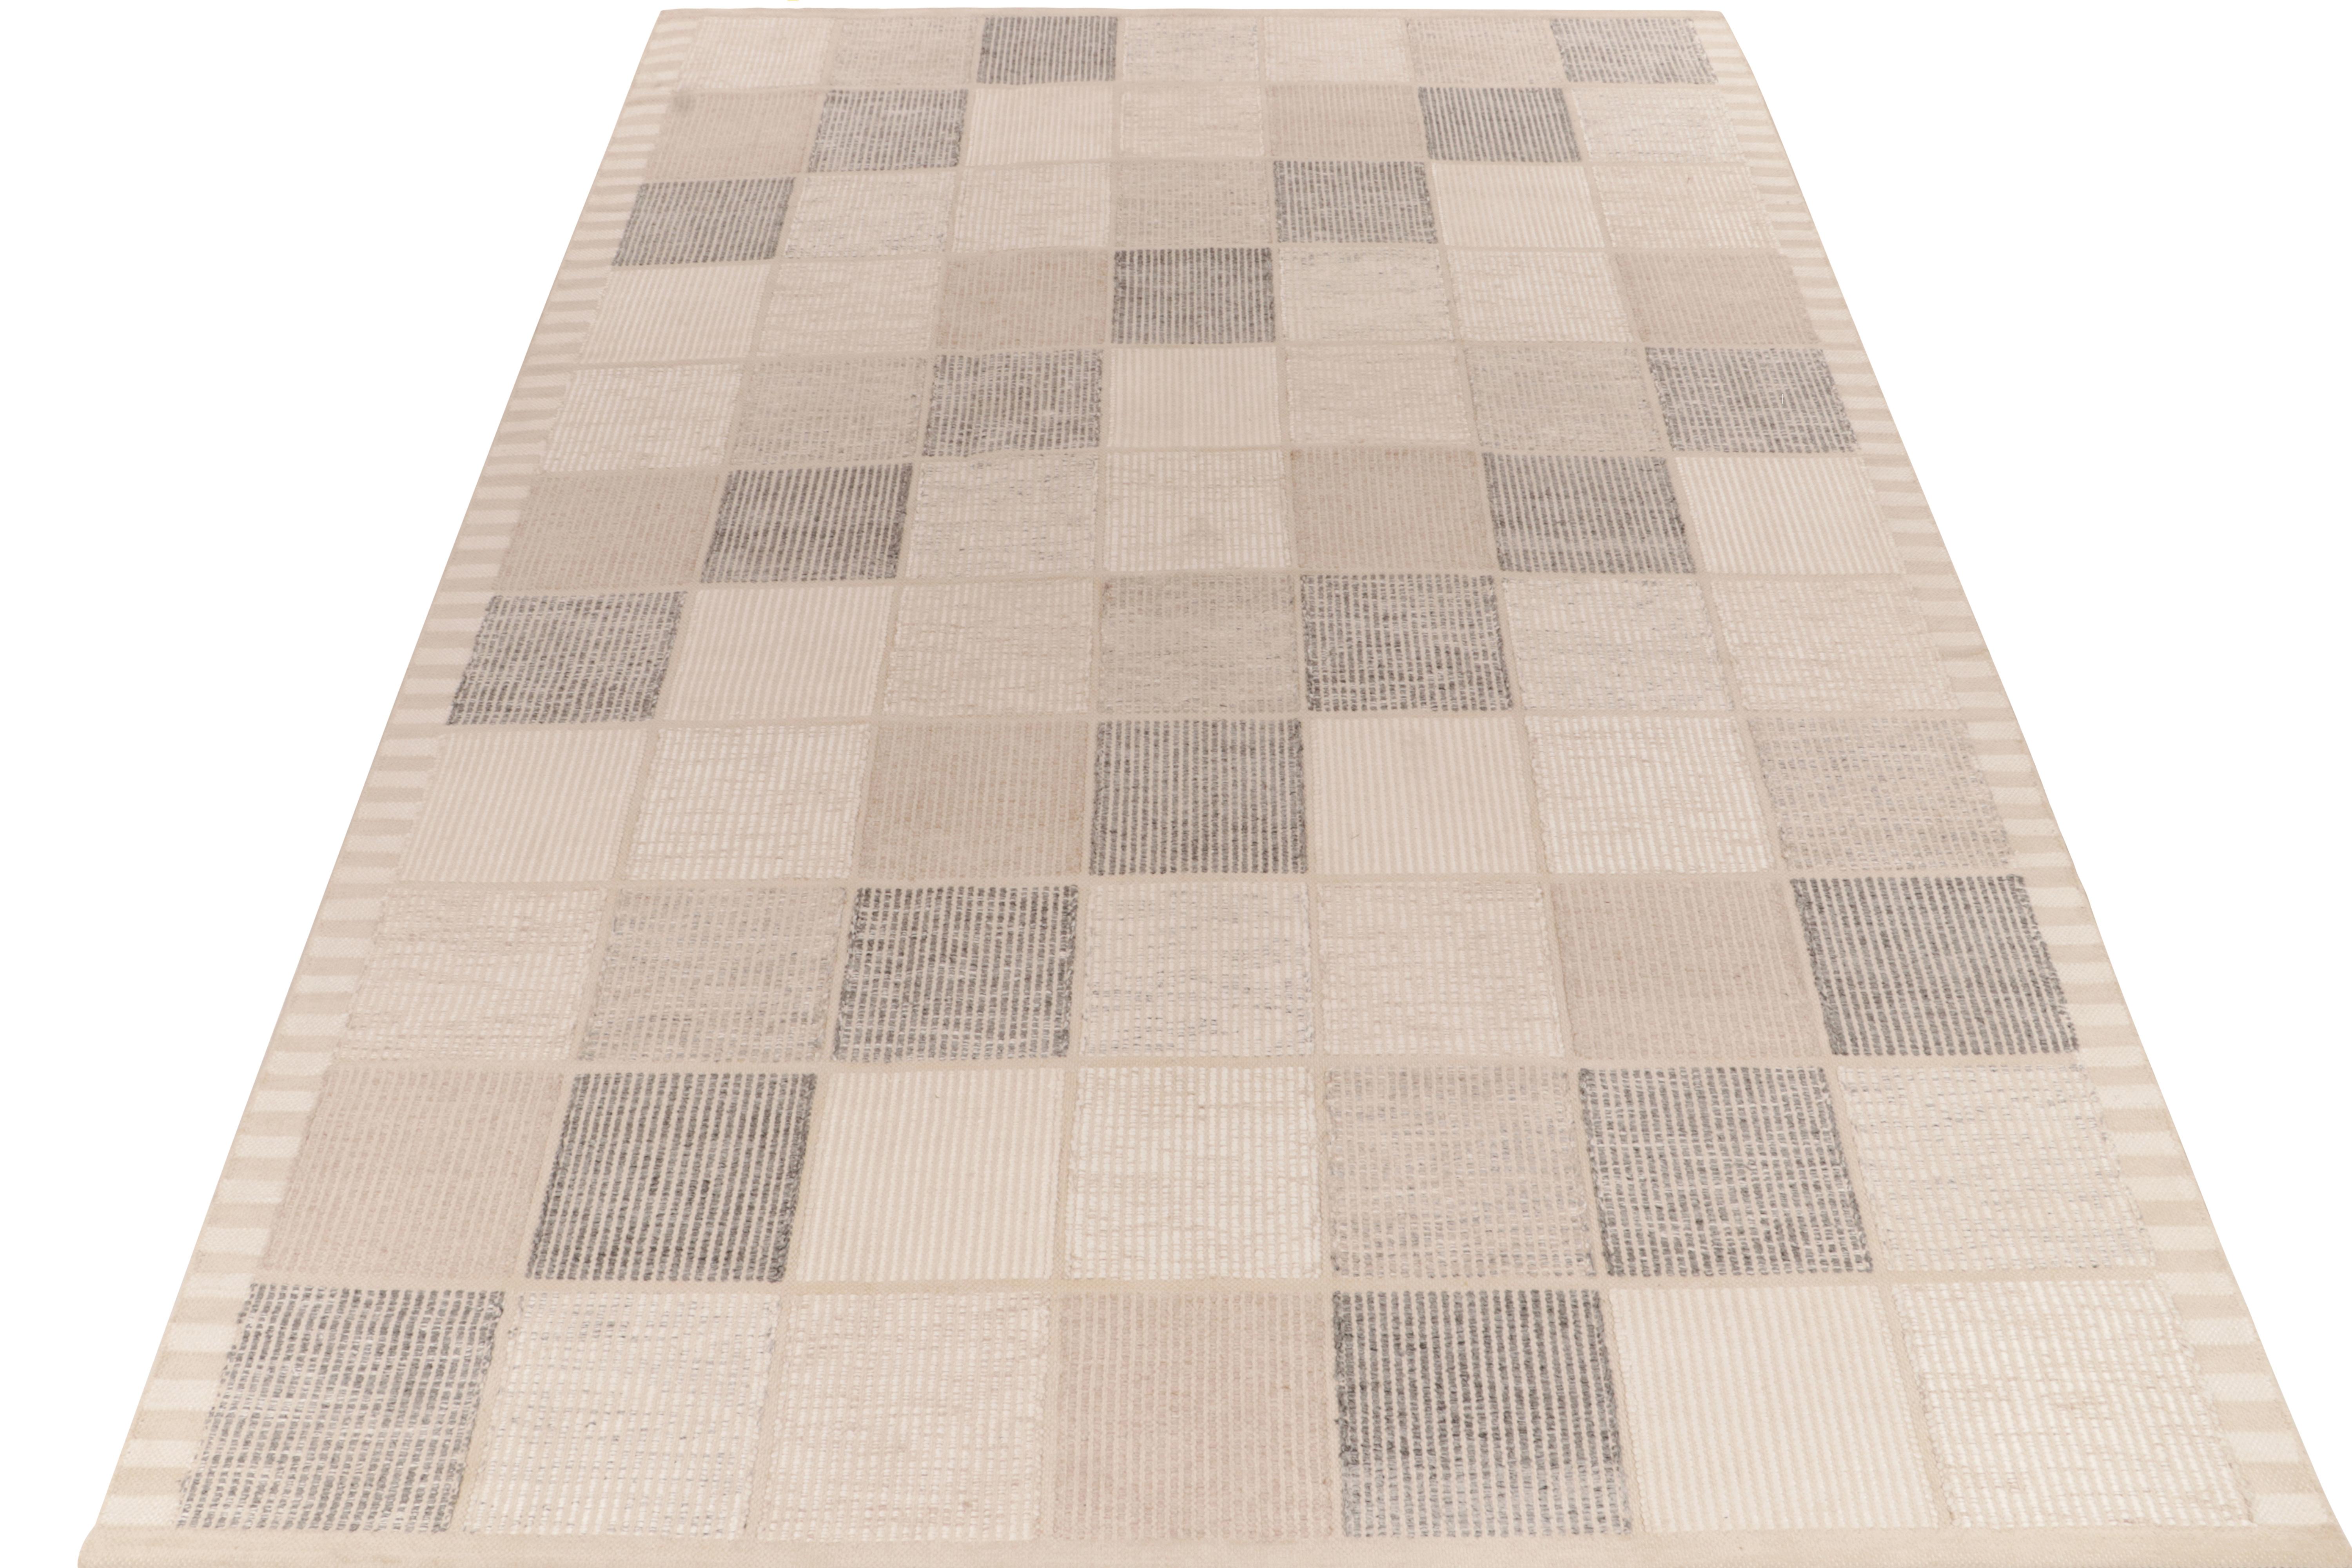 Exemplifying a modern take on Swedish Deco styles, a 10x14 flat weave from Rug & Kilim’s award-winning Scandinavian Kilim collection. The handwoven rug enjoys Moroccan design inspiration featuring compartmentalisation in white, beige, stone blue,